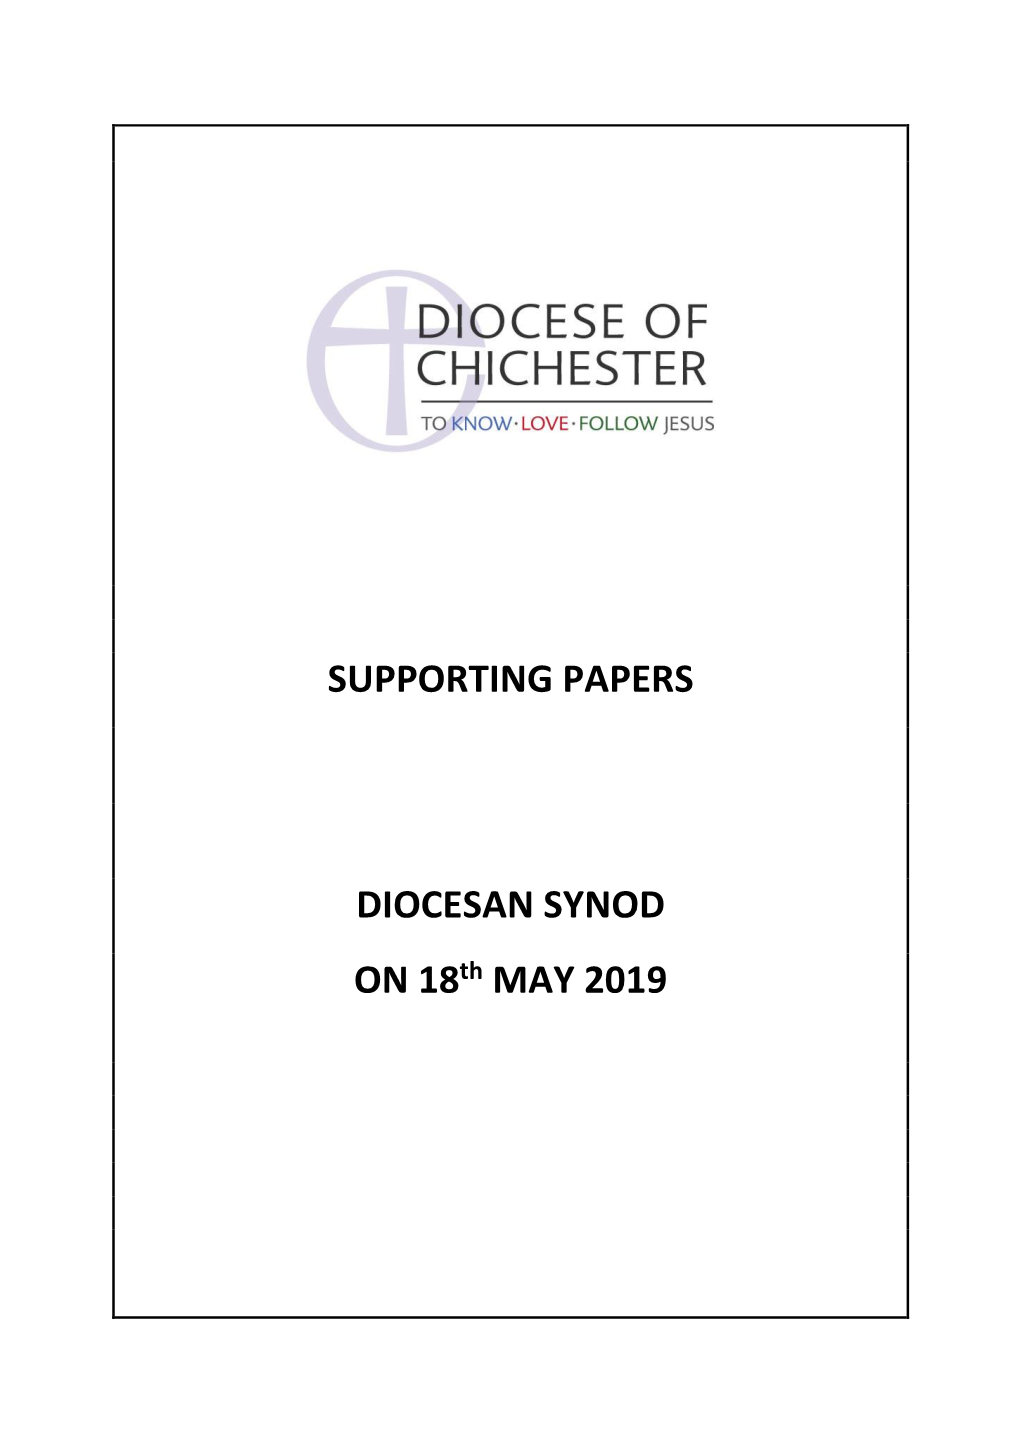 SUPPORTING PAPERS DIOCESAN SYNOD on 18Th MAY 2019